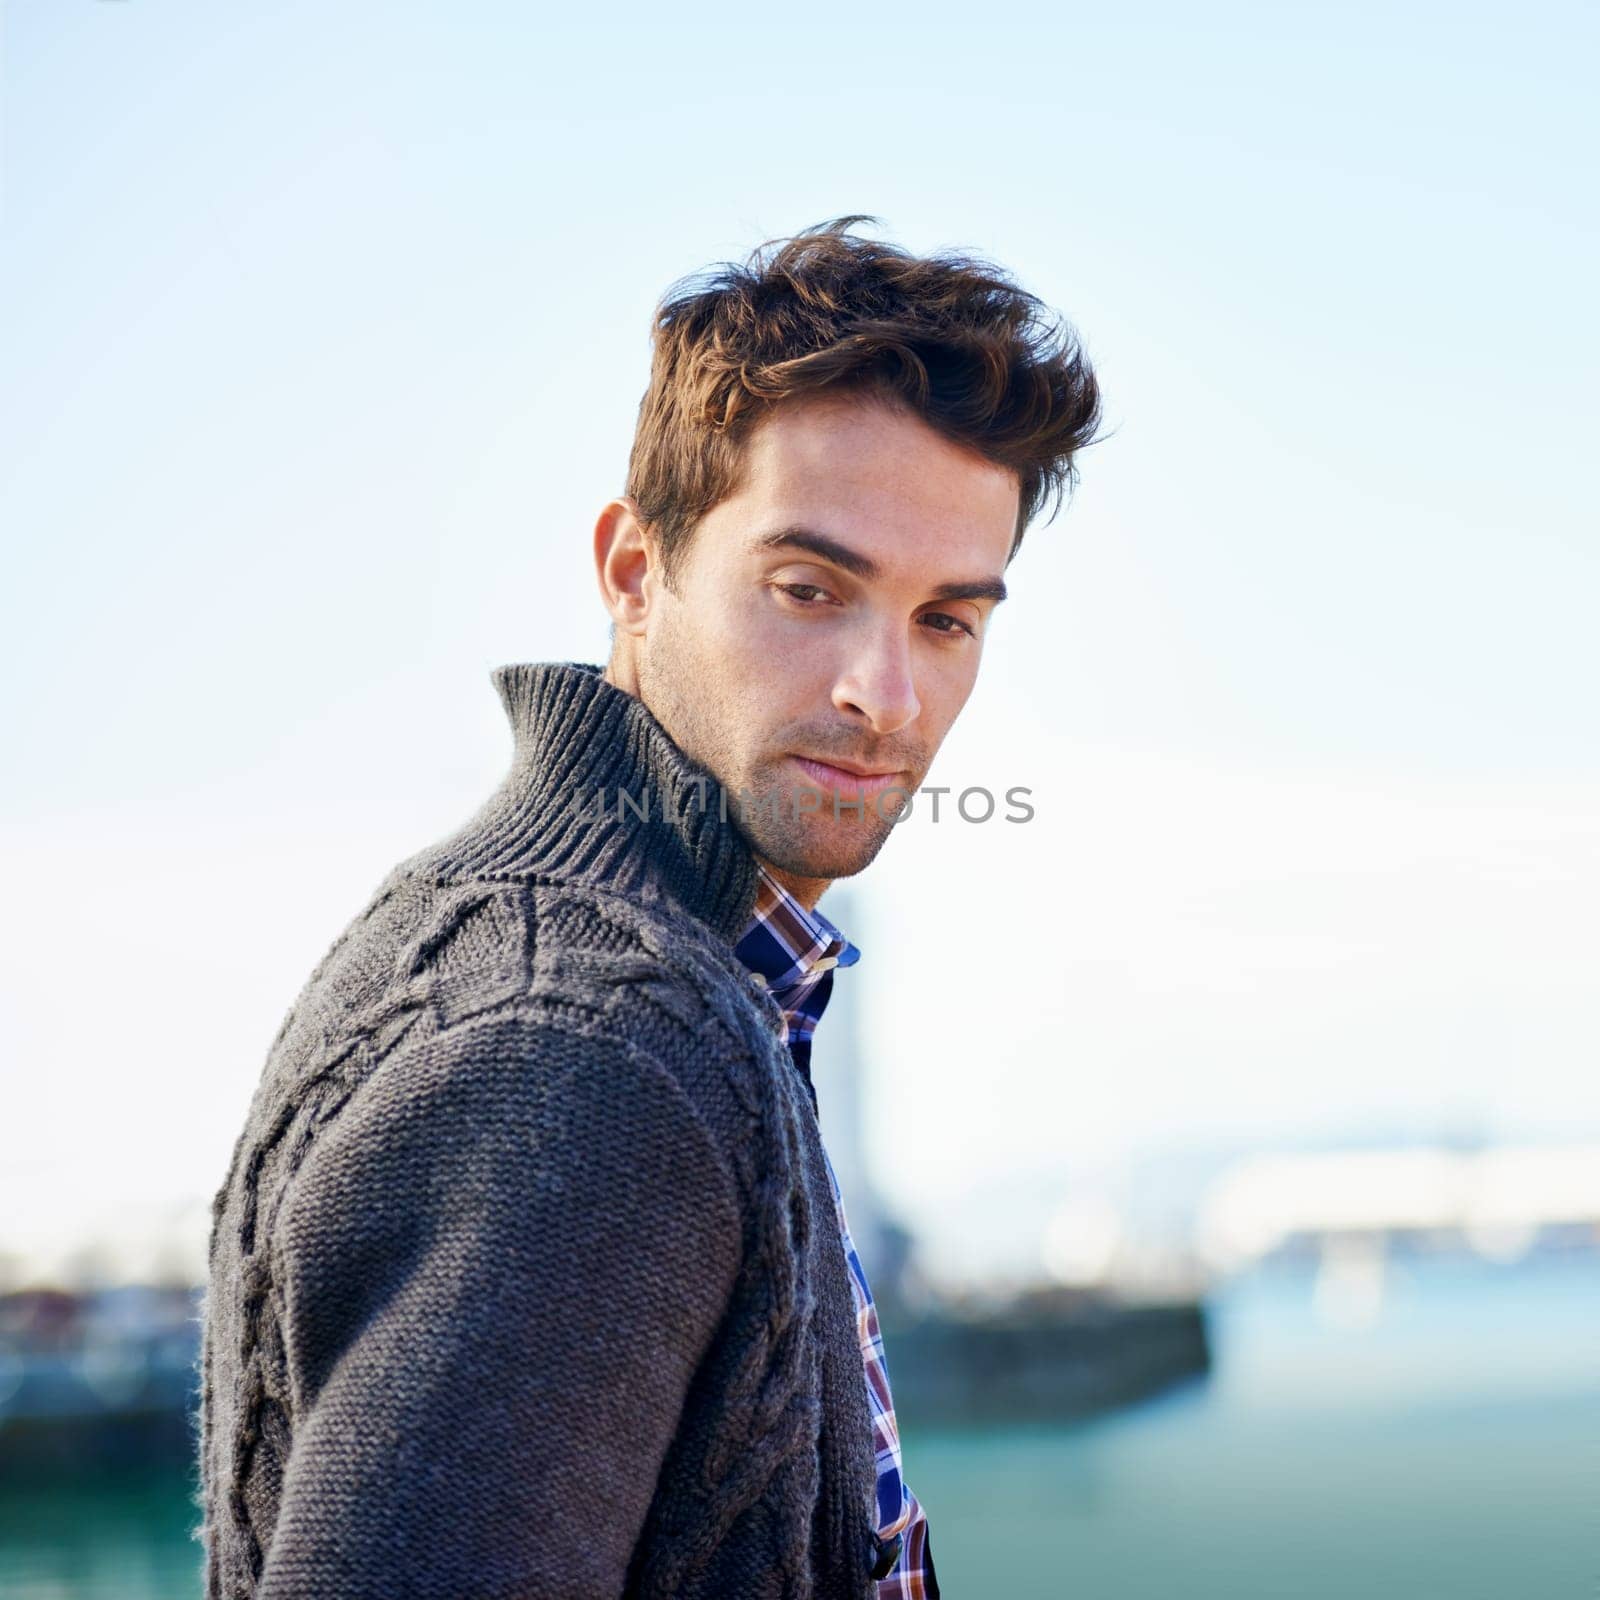 Ocean, outdoors and man with thinking in city for travel, journey or weekend commute in Canada. Confident, male person and serious face with idea for holiday, vacation or getaway trip by sea.